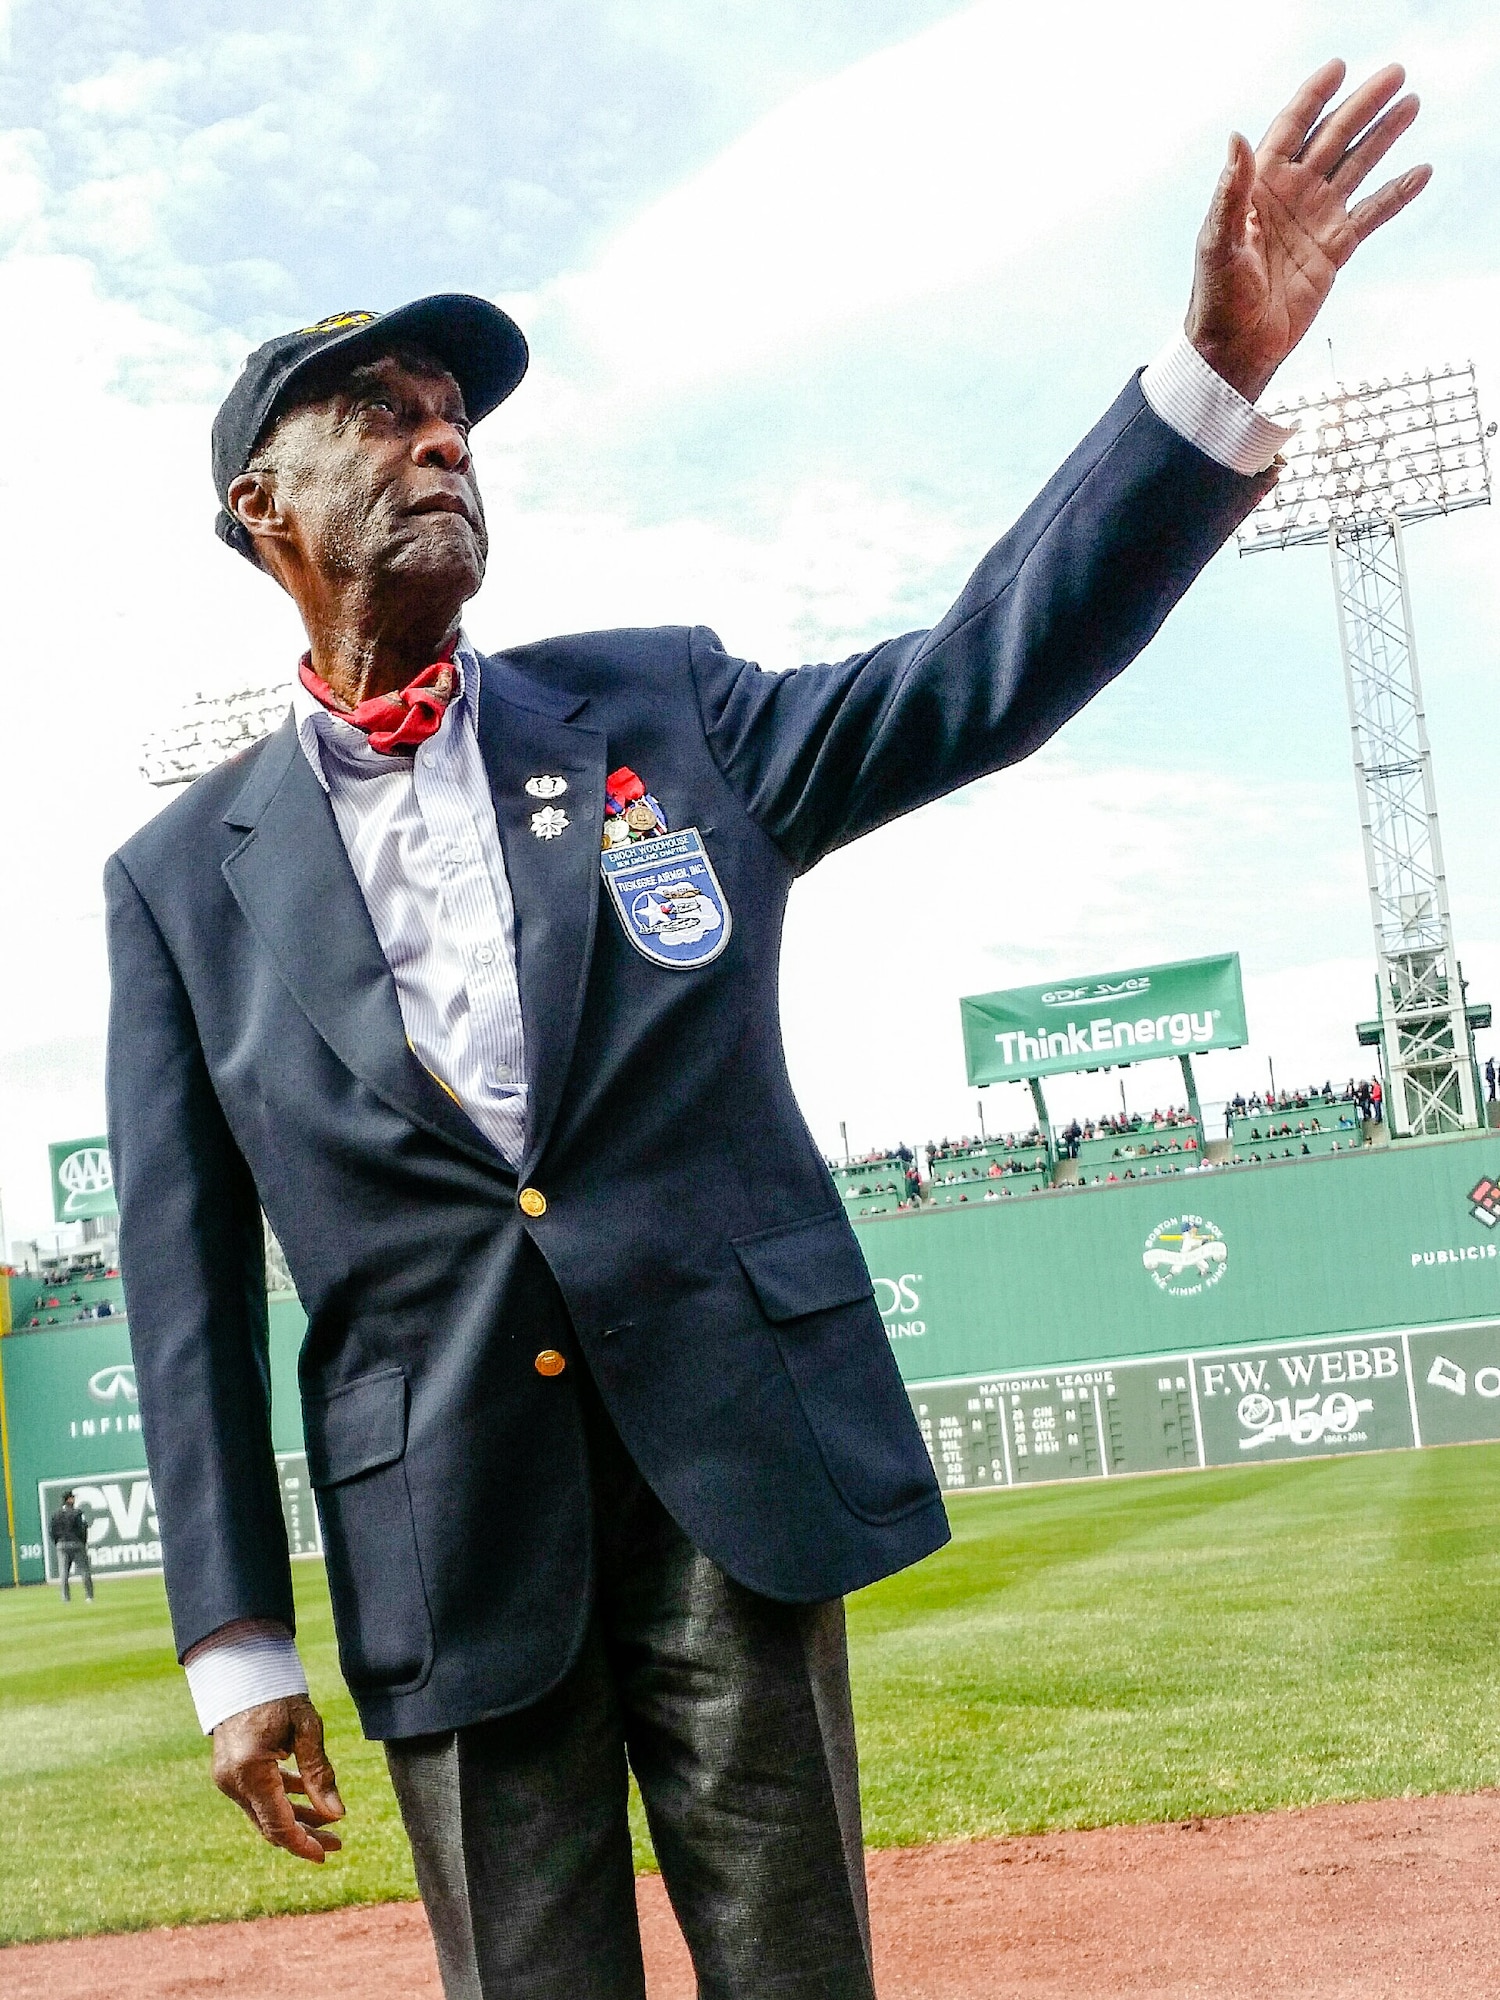 BOSTON -- Retired U.S. Air Force Lt. Col. Enoch Woodhouse III, an original member of the Tuskegee Airmen, is honored during a Boston Red Sox game at Fenway Park April 11. Woodhouse, who joined the U.S. Army Air Corps in 1946, was recognized during the game as part of the team's Hats Off to Heroes program that recognizes military service.  (U.S. Air Force photo by Mark Herlihy)